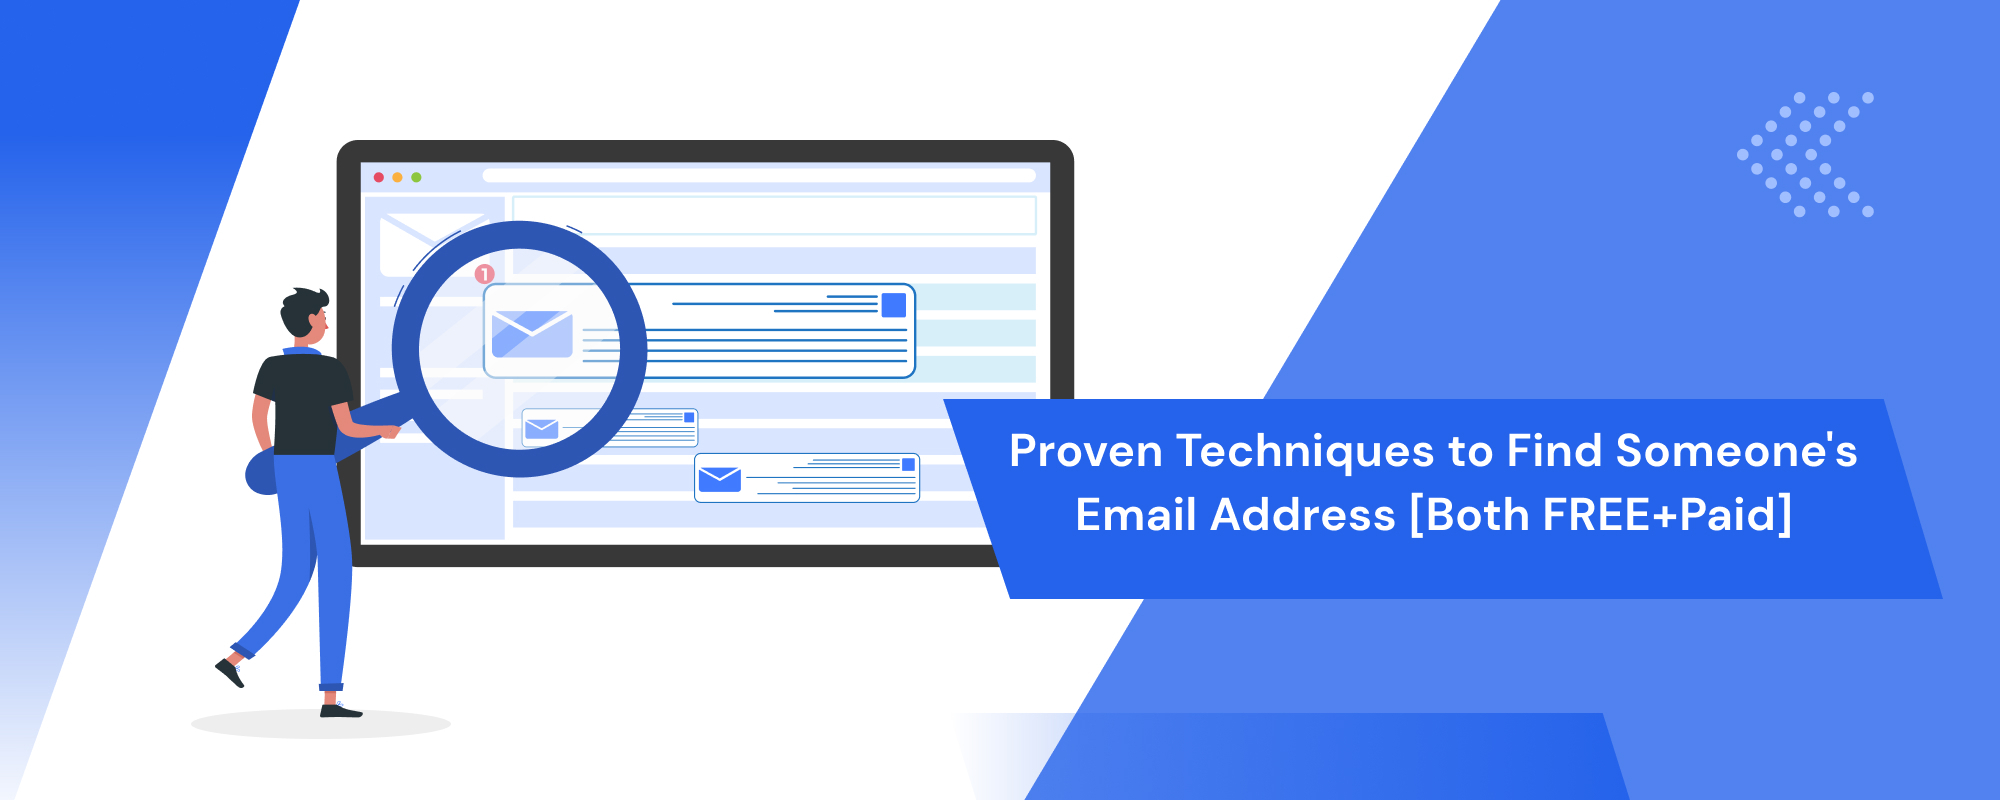 6 Ways to Find Someone's Email Address [Both FREE+Paid]